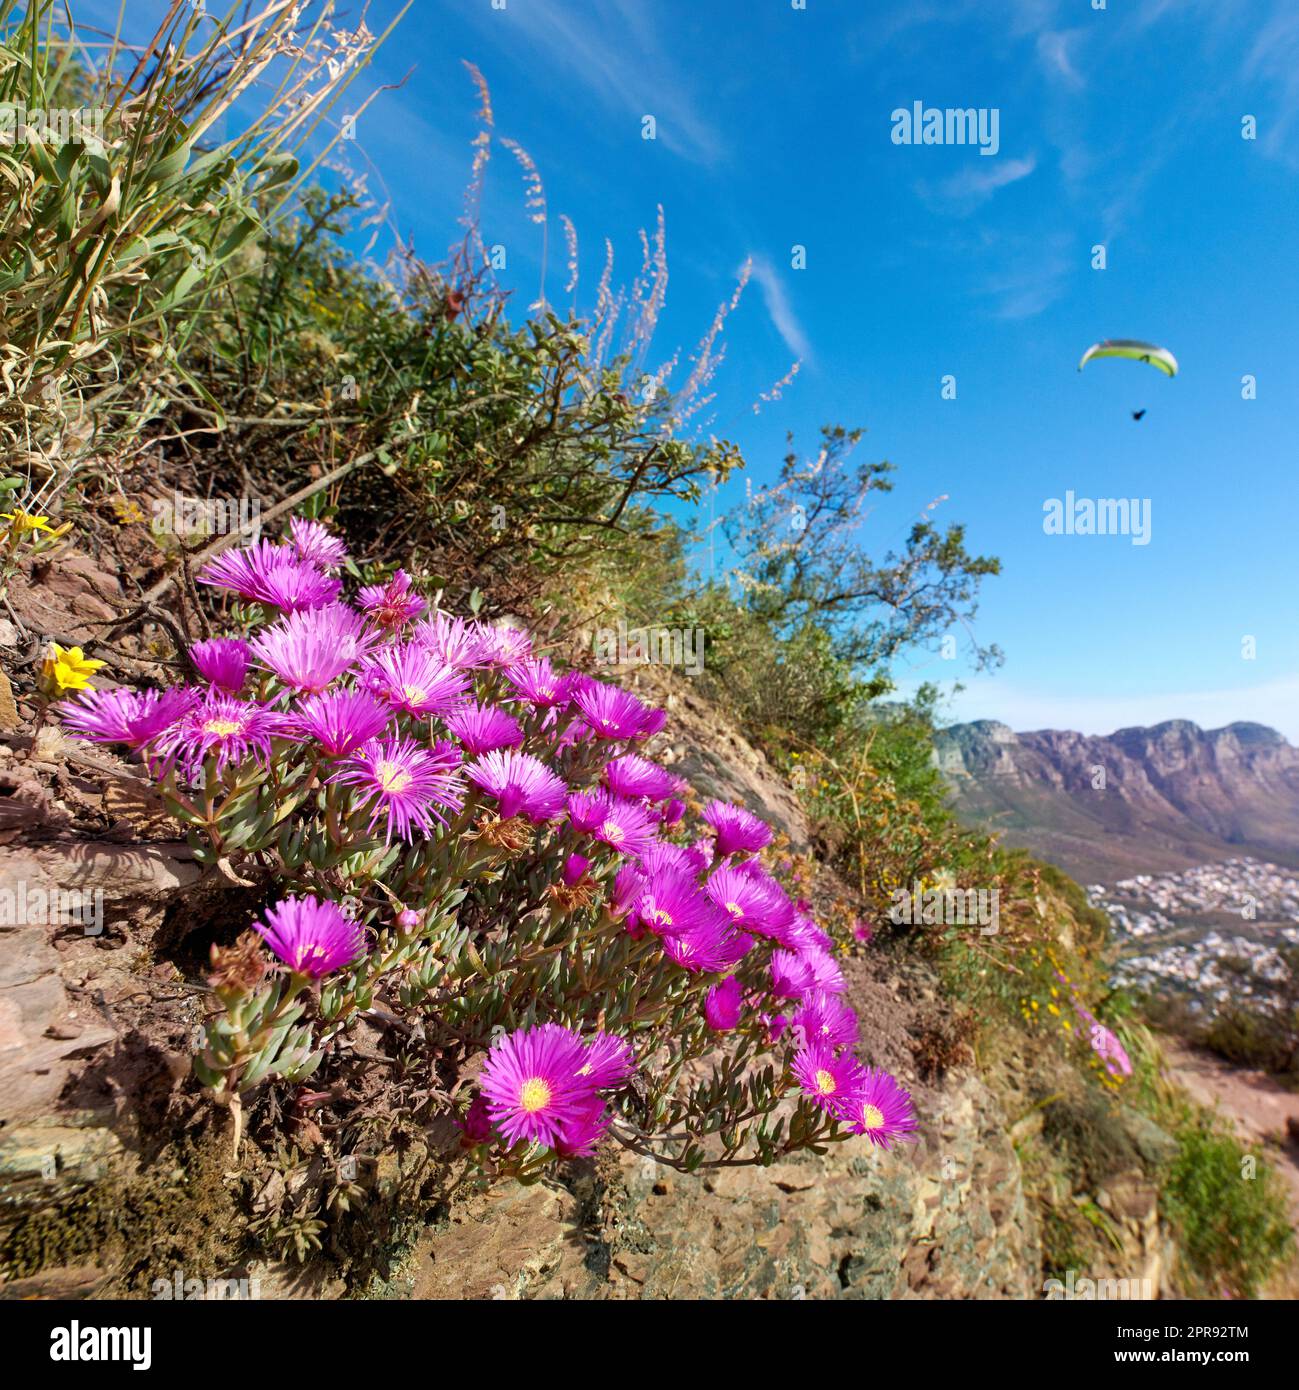 Pink flowers growing on a mountain slope with a paraglider flying in the blue sky background. Colorful flora with of carpobrotus edulis from the ice plant species in natural environment Stock Photo